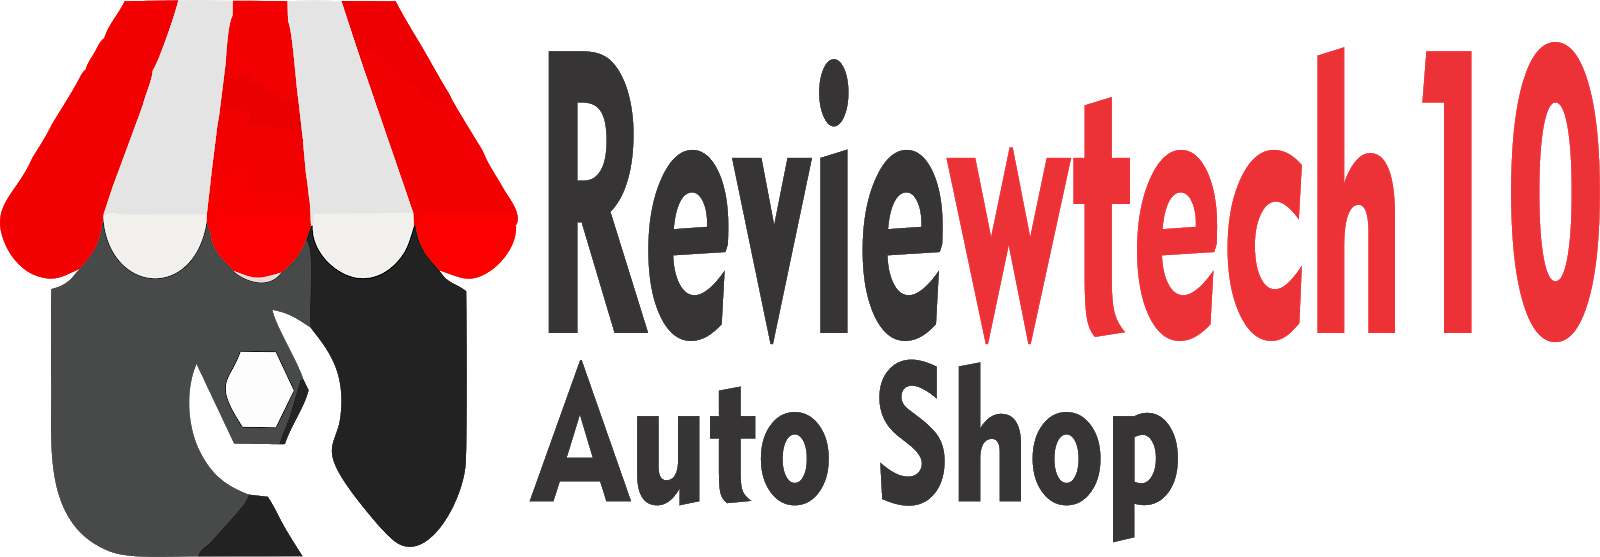 reviewtechs10